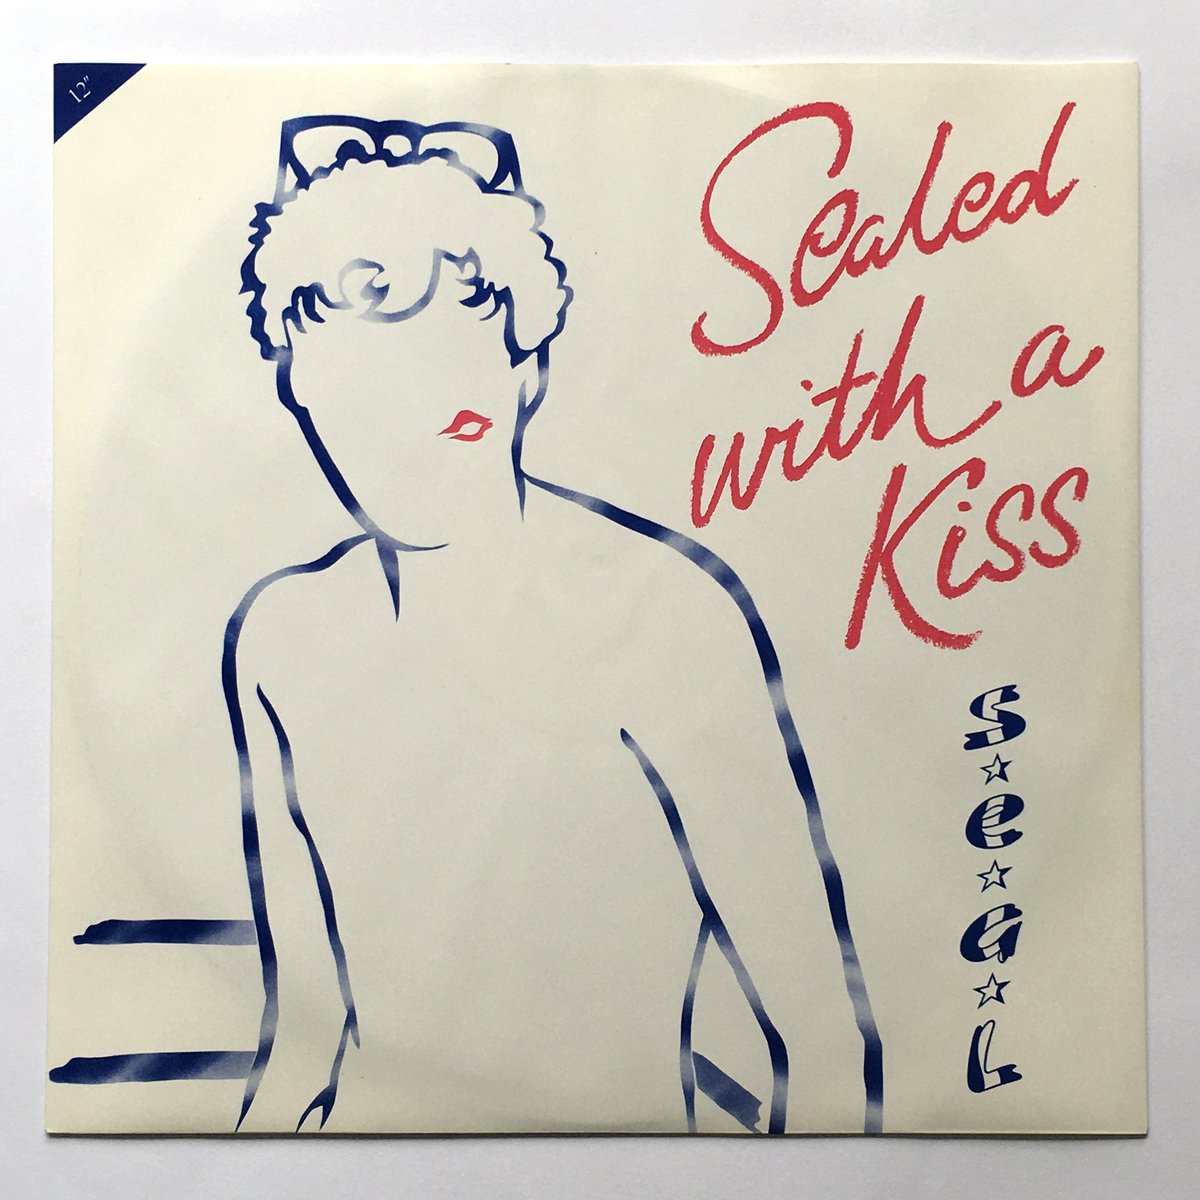 Soak - Sealed with a Kiss